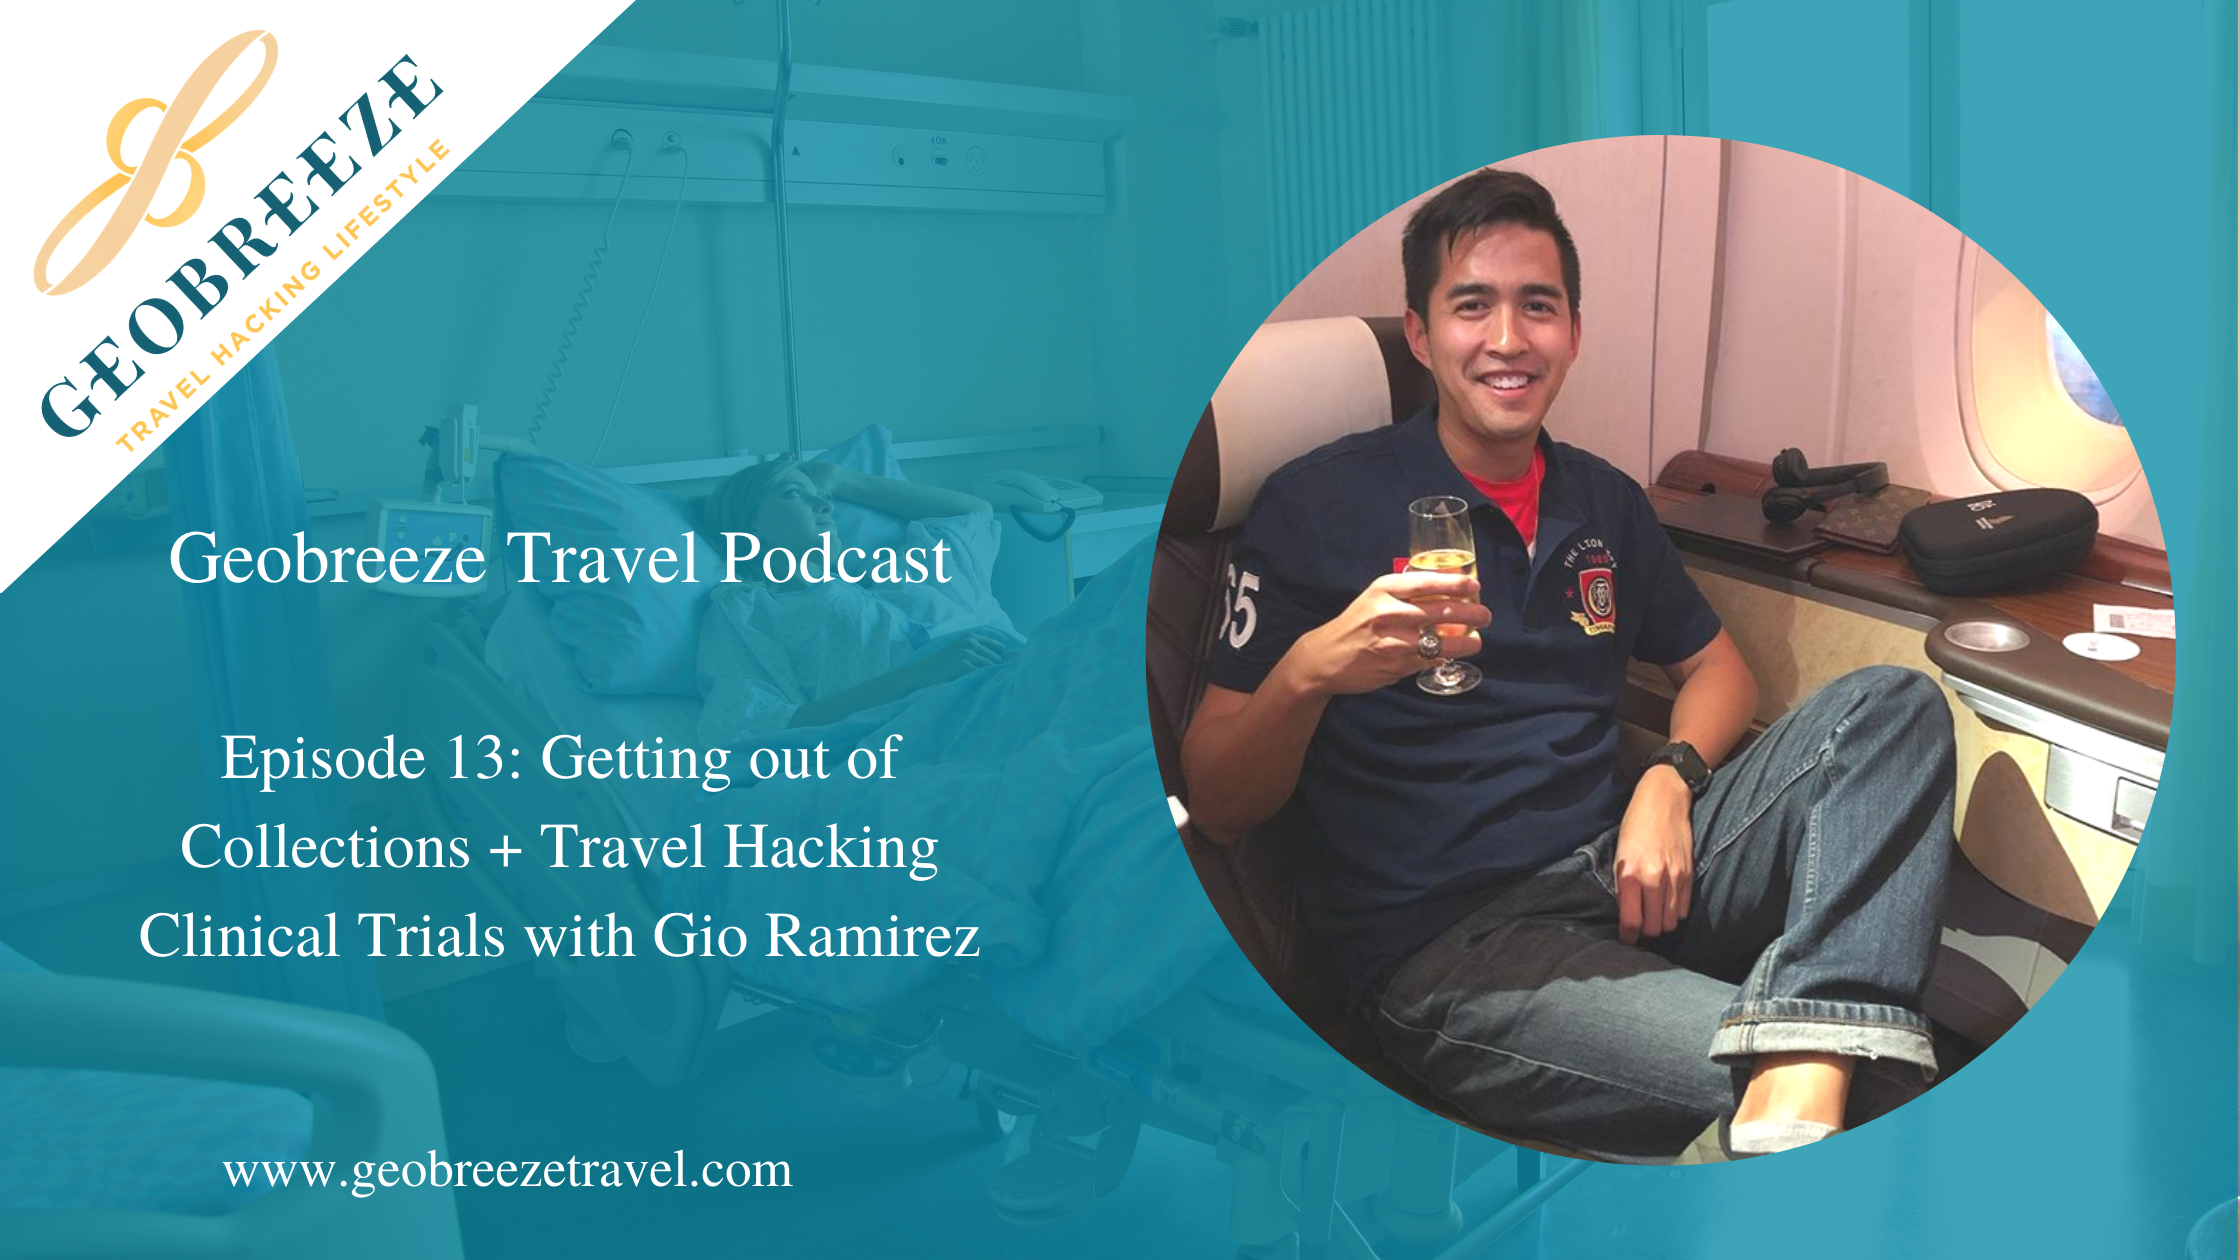 Episode 13: Getting Out of Collections + Travel Hacking Clinical Trials with Gio Ramirez